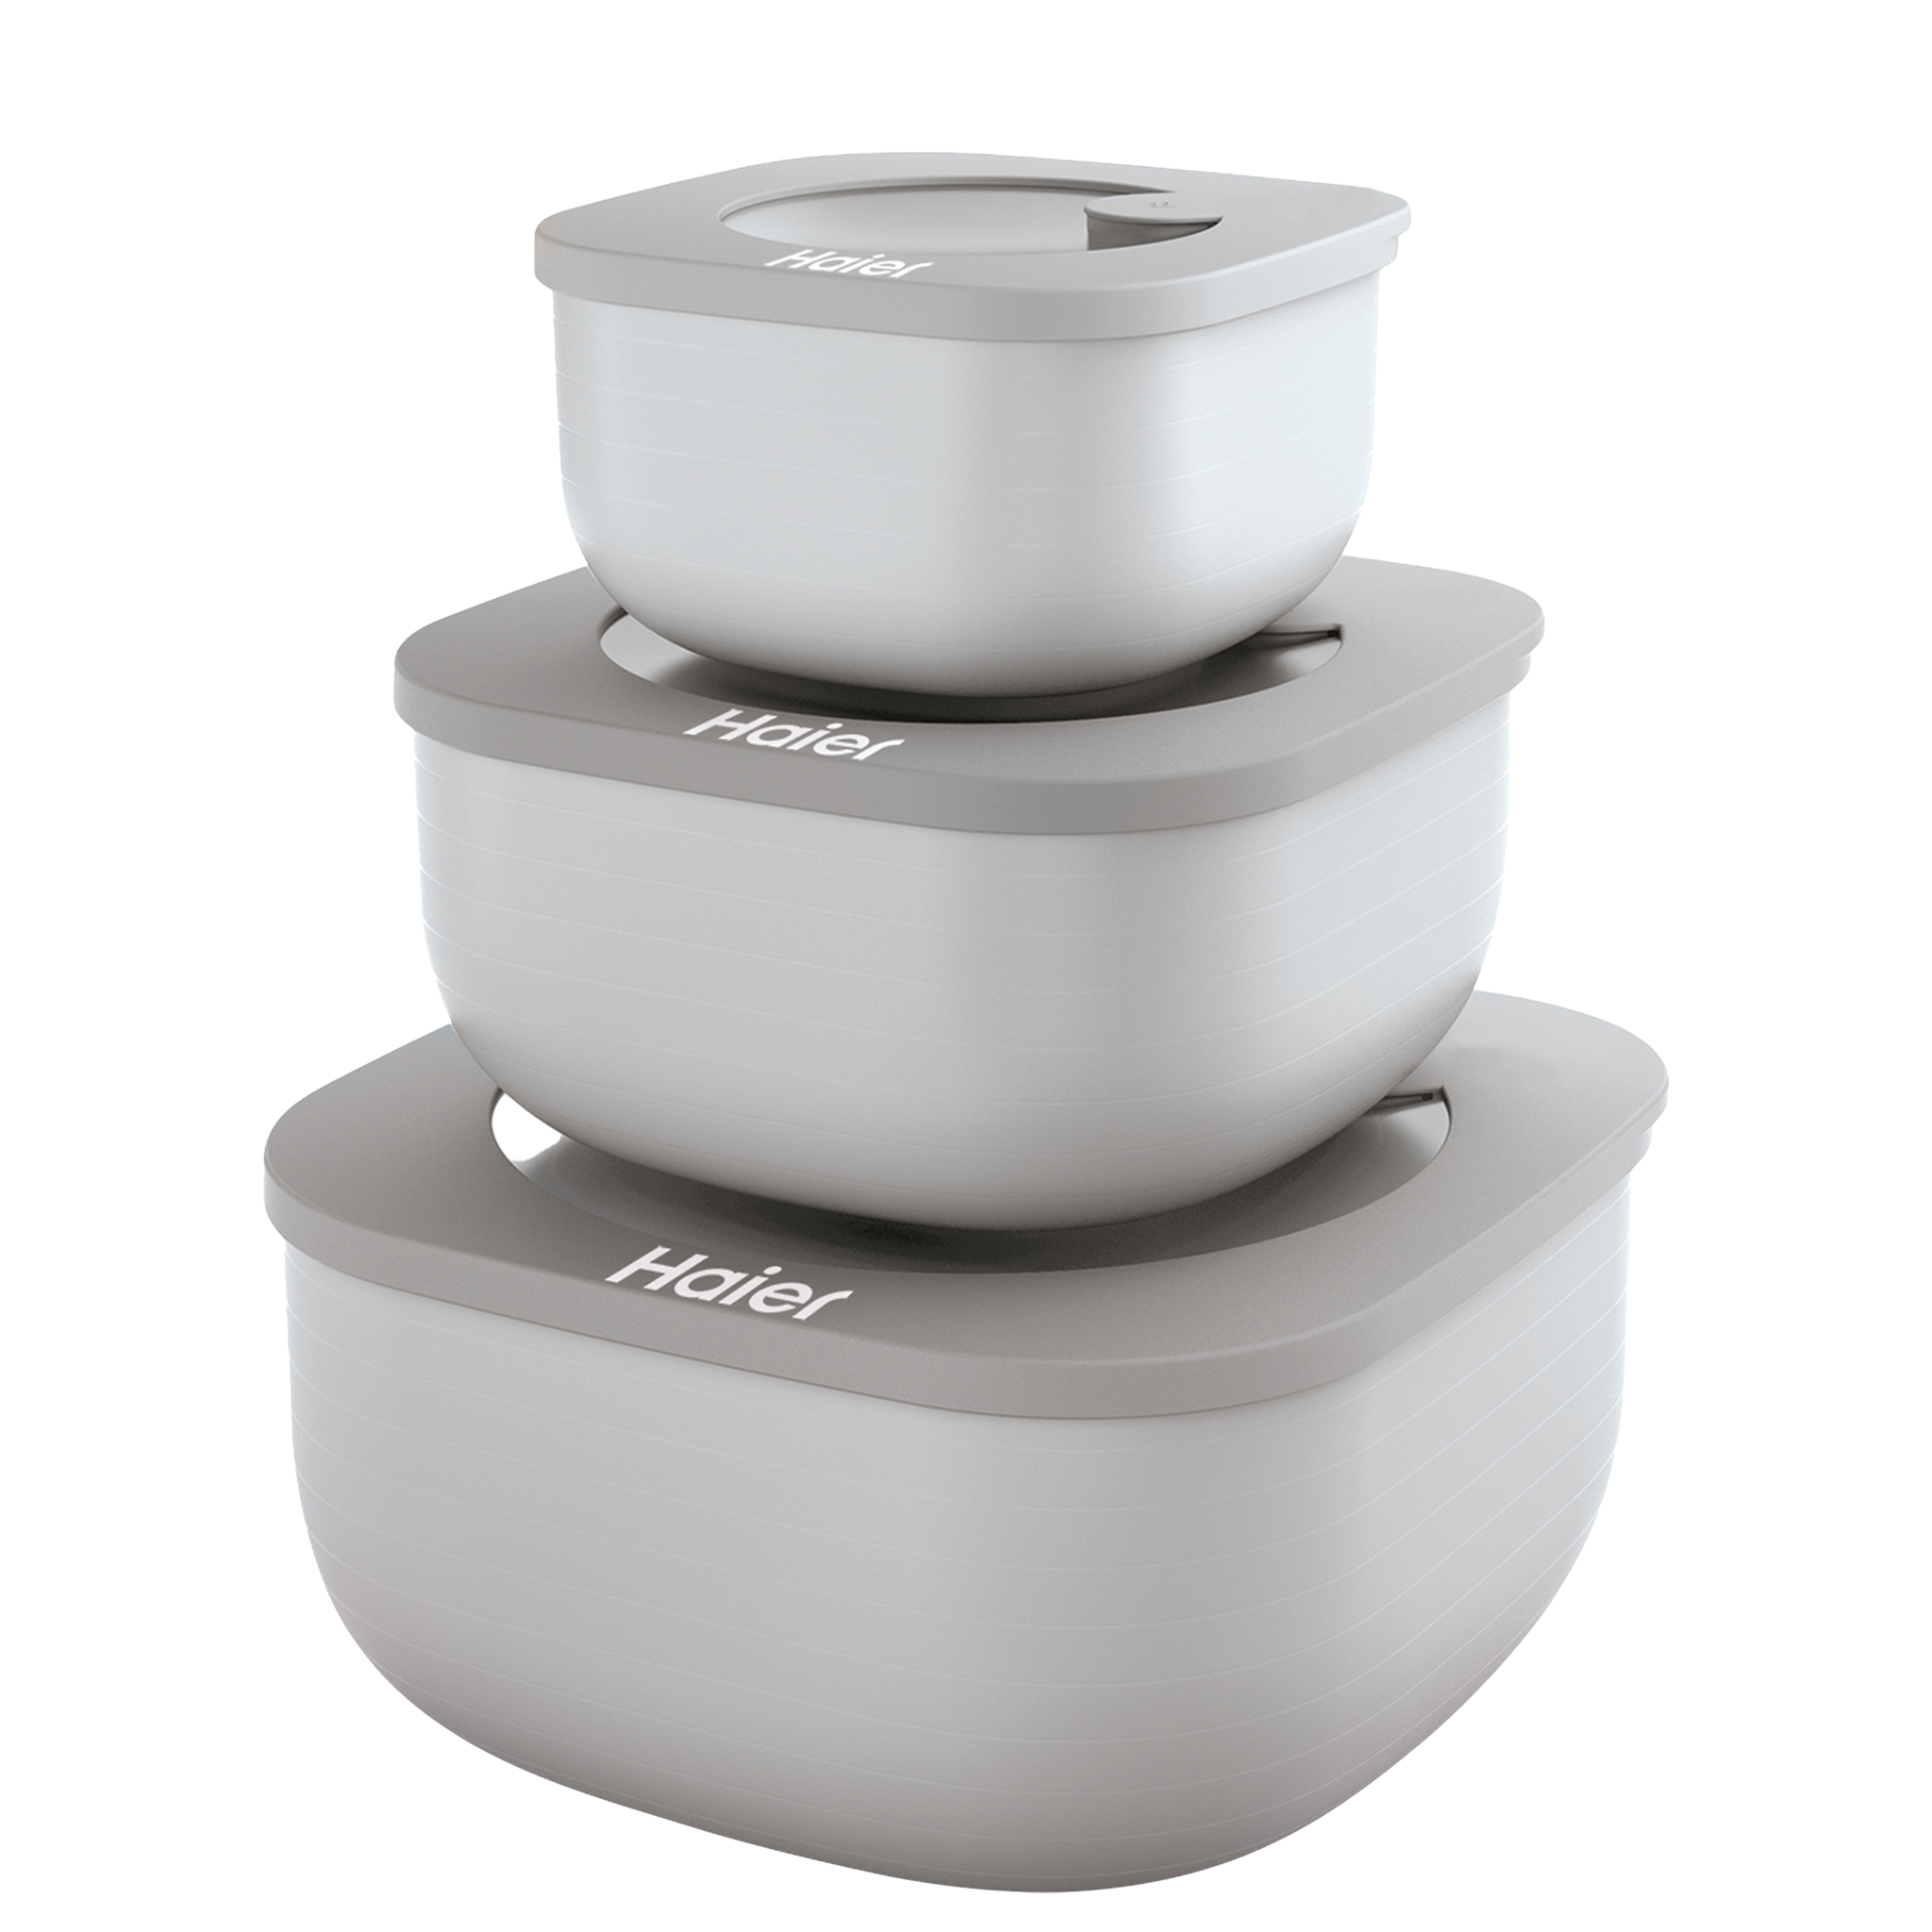 Haier By Guzzini Set of 3 Airtight Food Containers